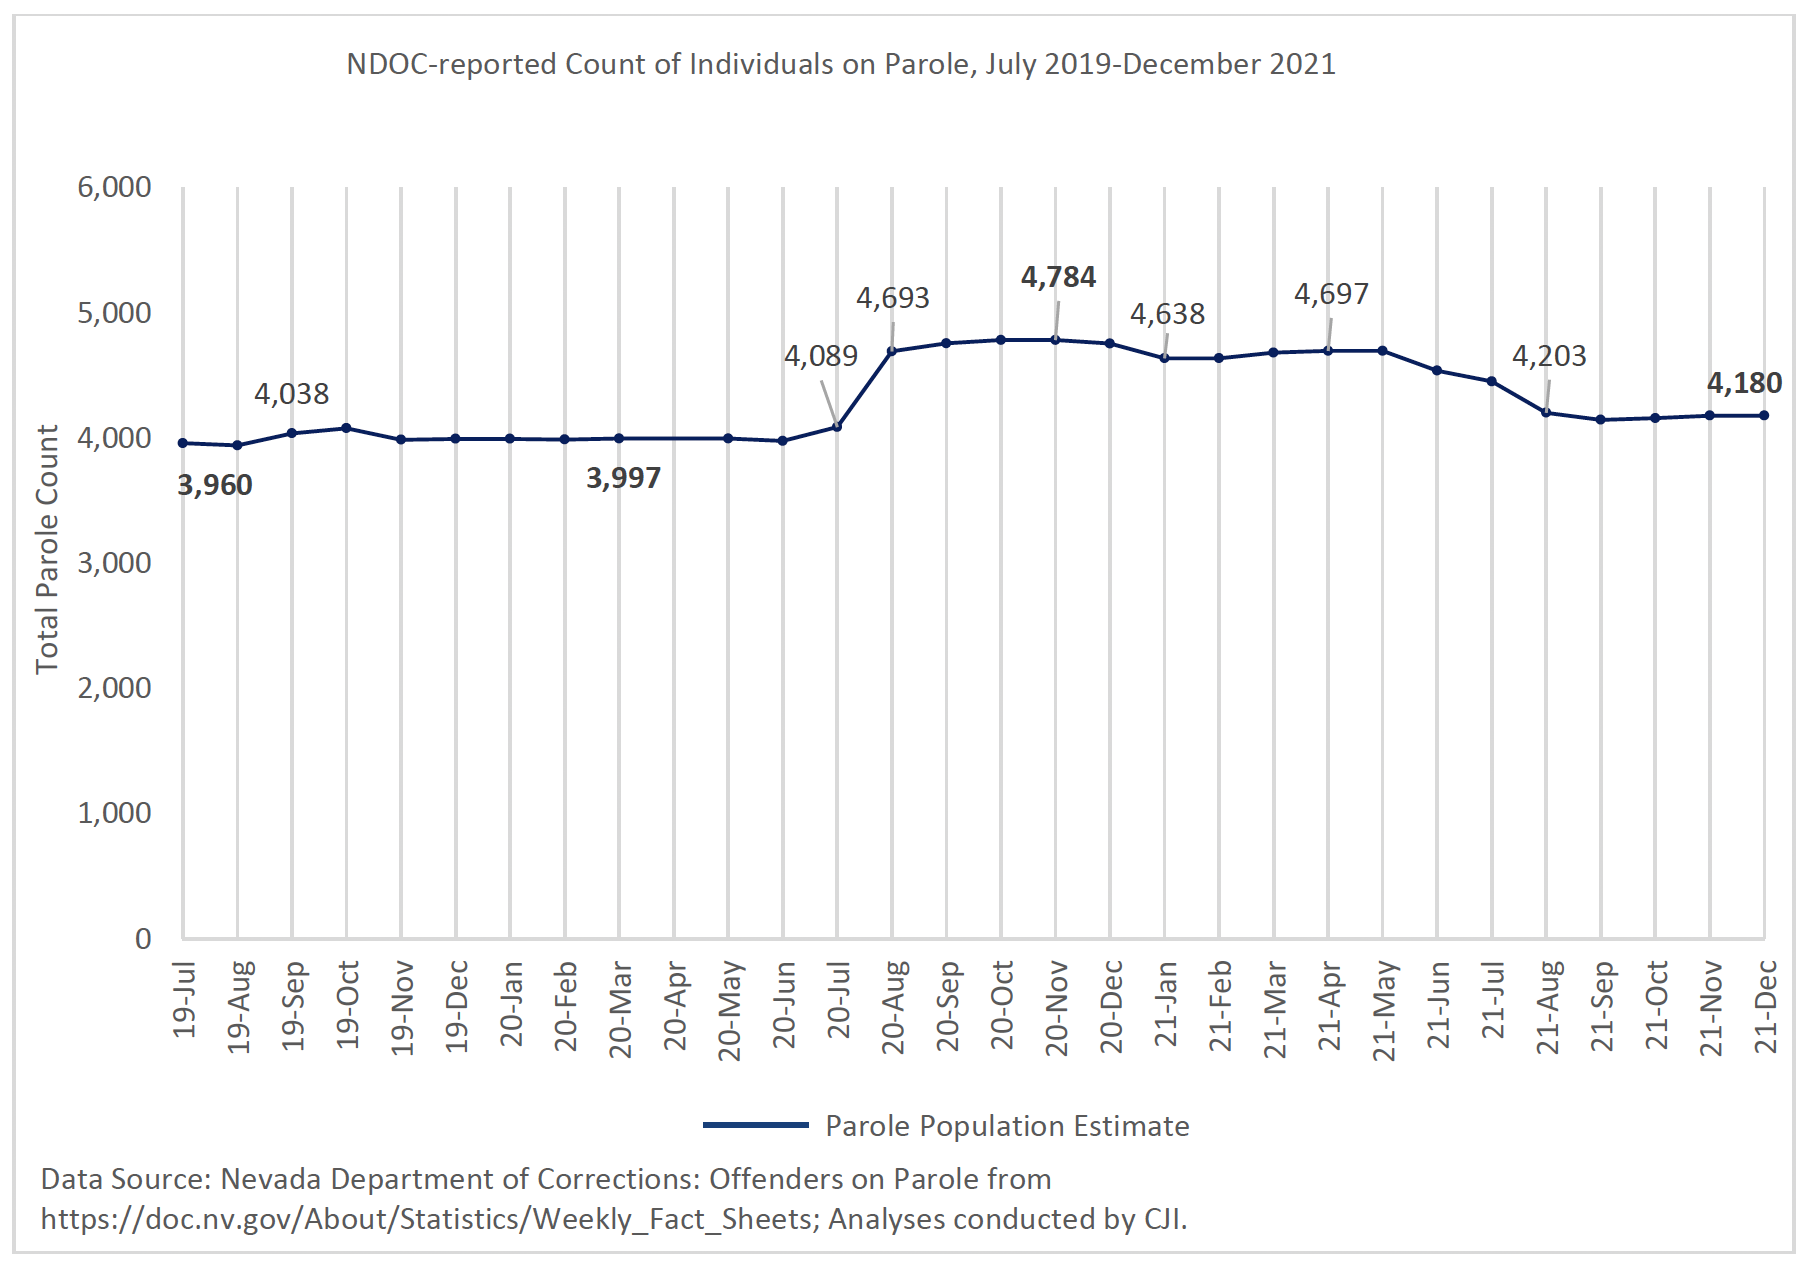 View of NDOC data show a 20 percent increase in parole population during COVID-19 